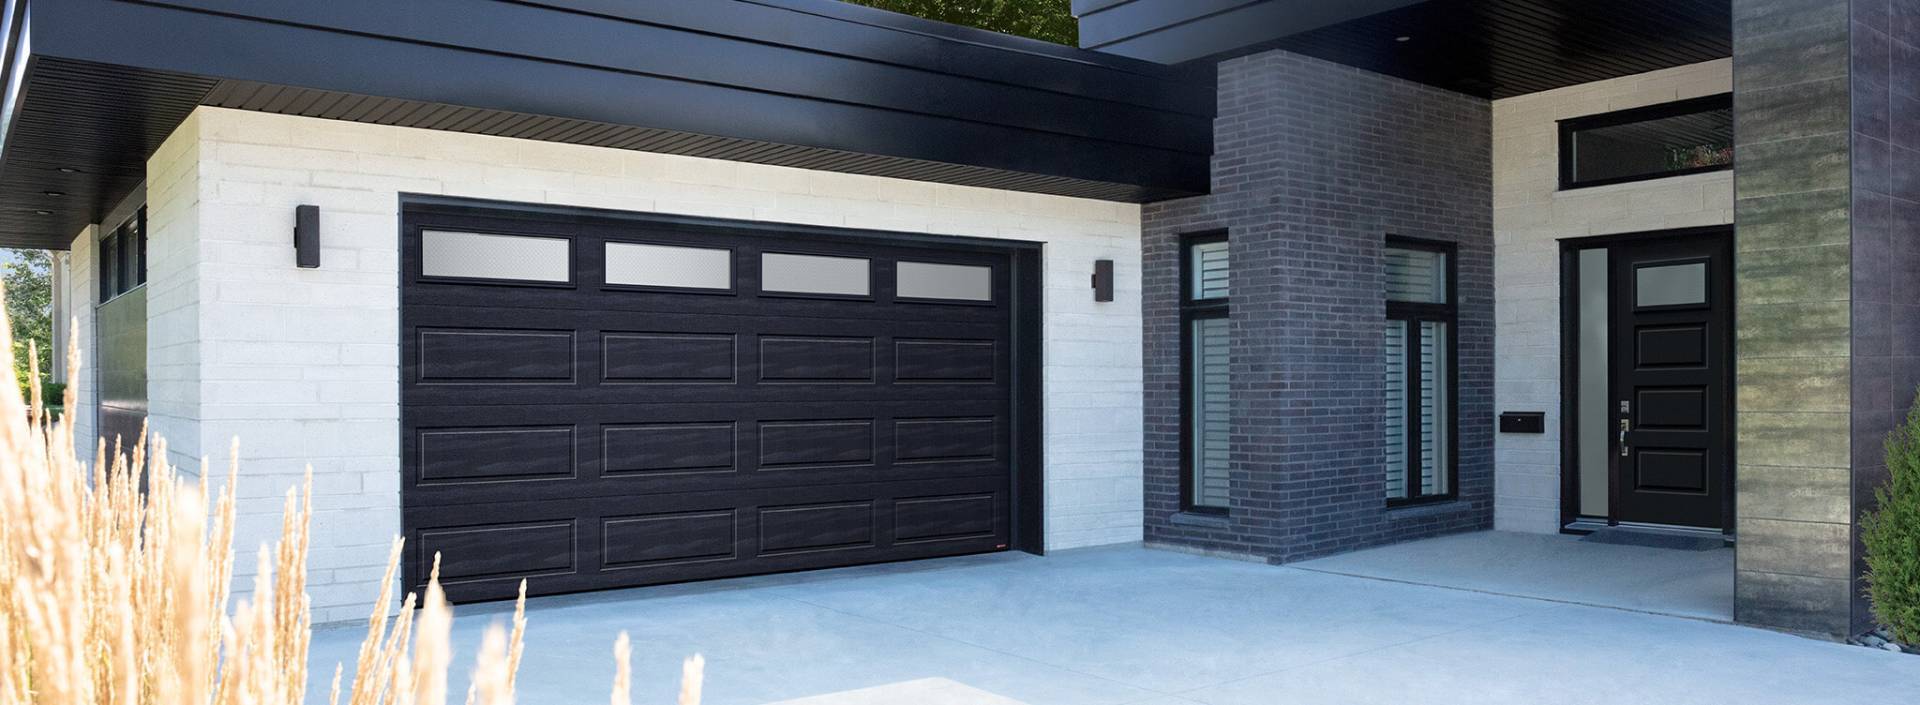 How do fire-rated commercial garage doors work?